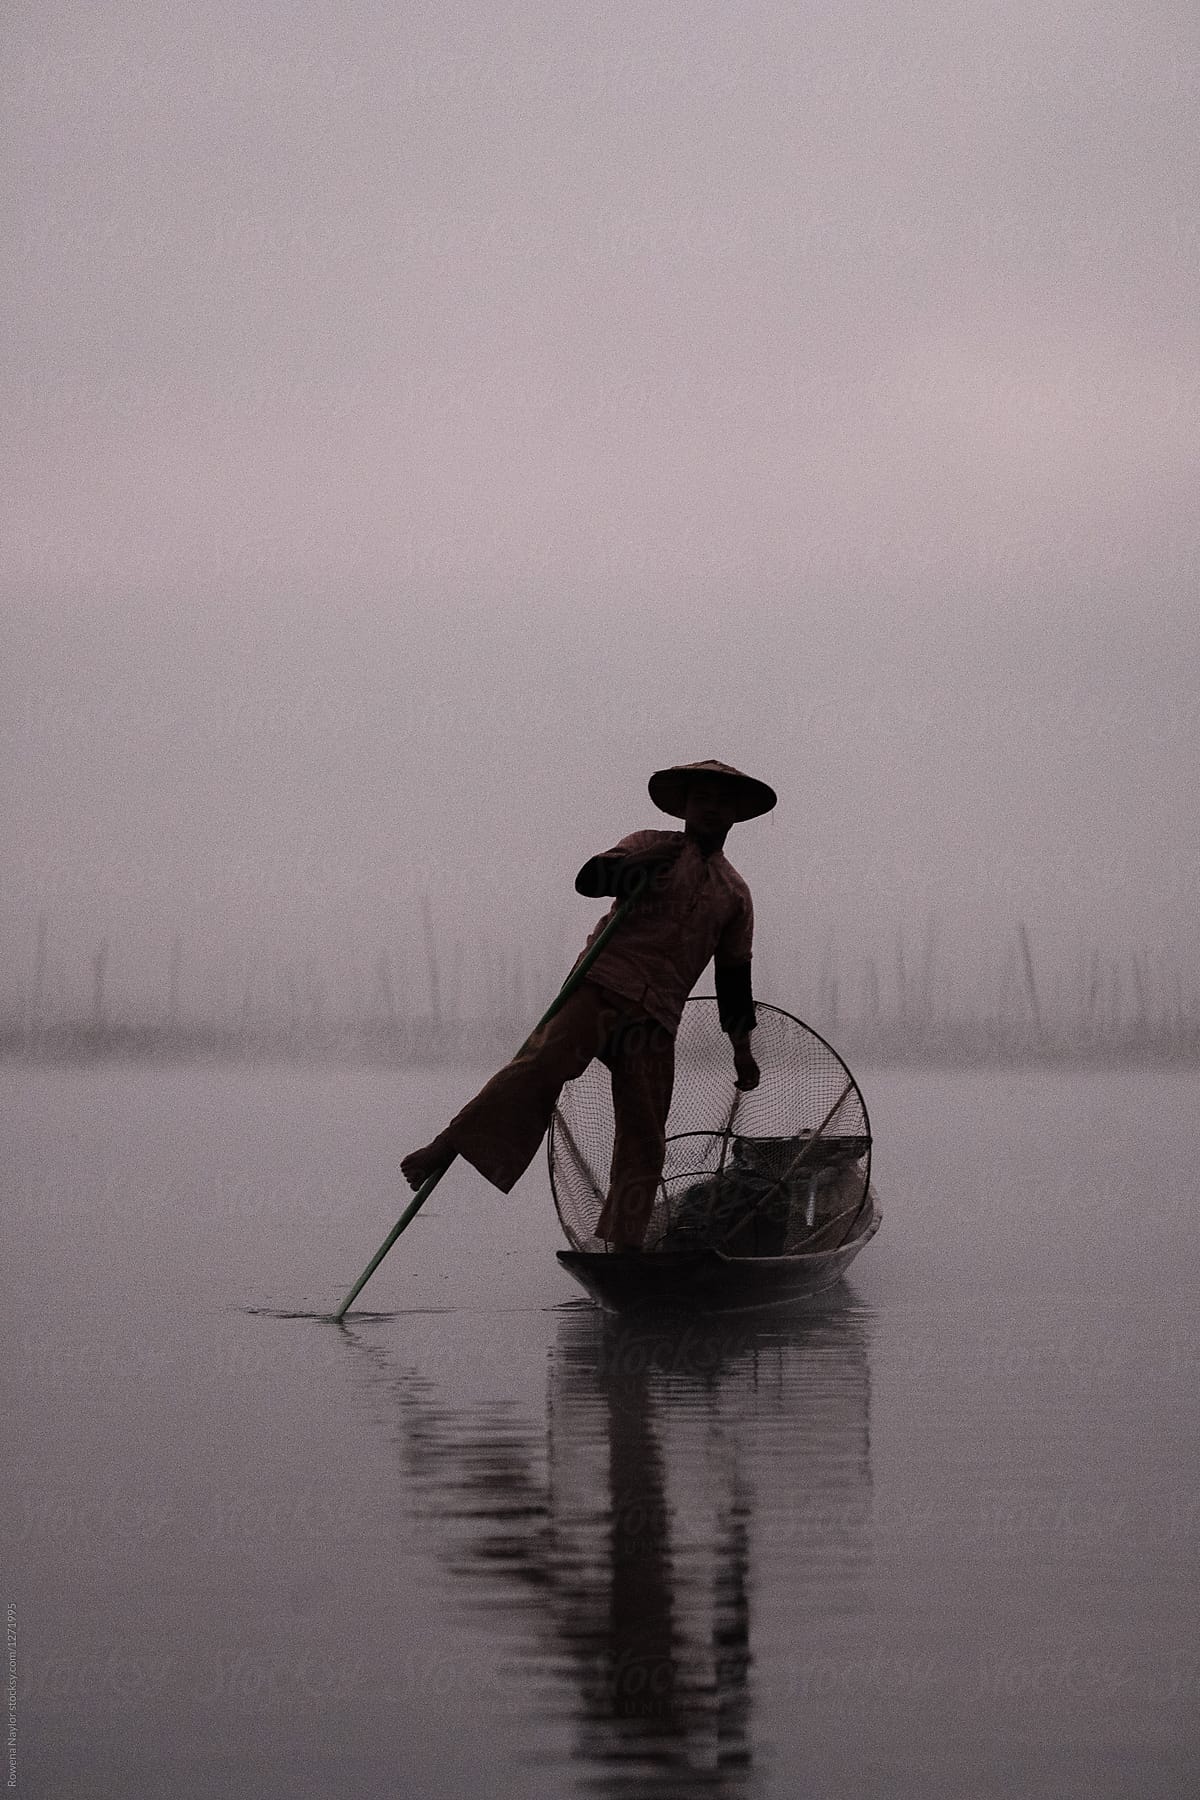 Silouette of traditional Shan fisherman at day break fishing on a misty Inle Lake, Myanmar